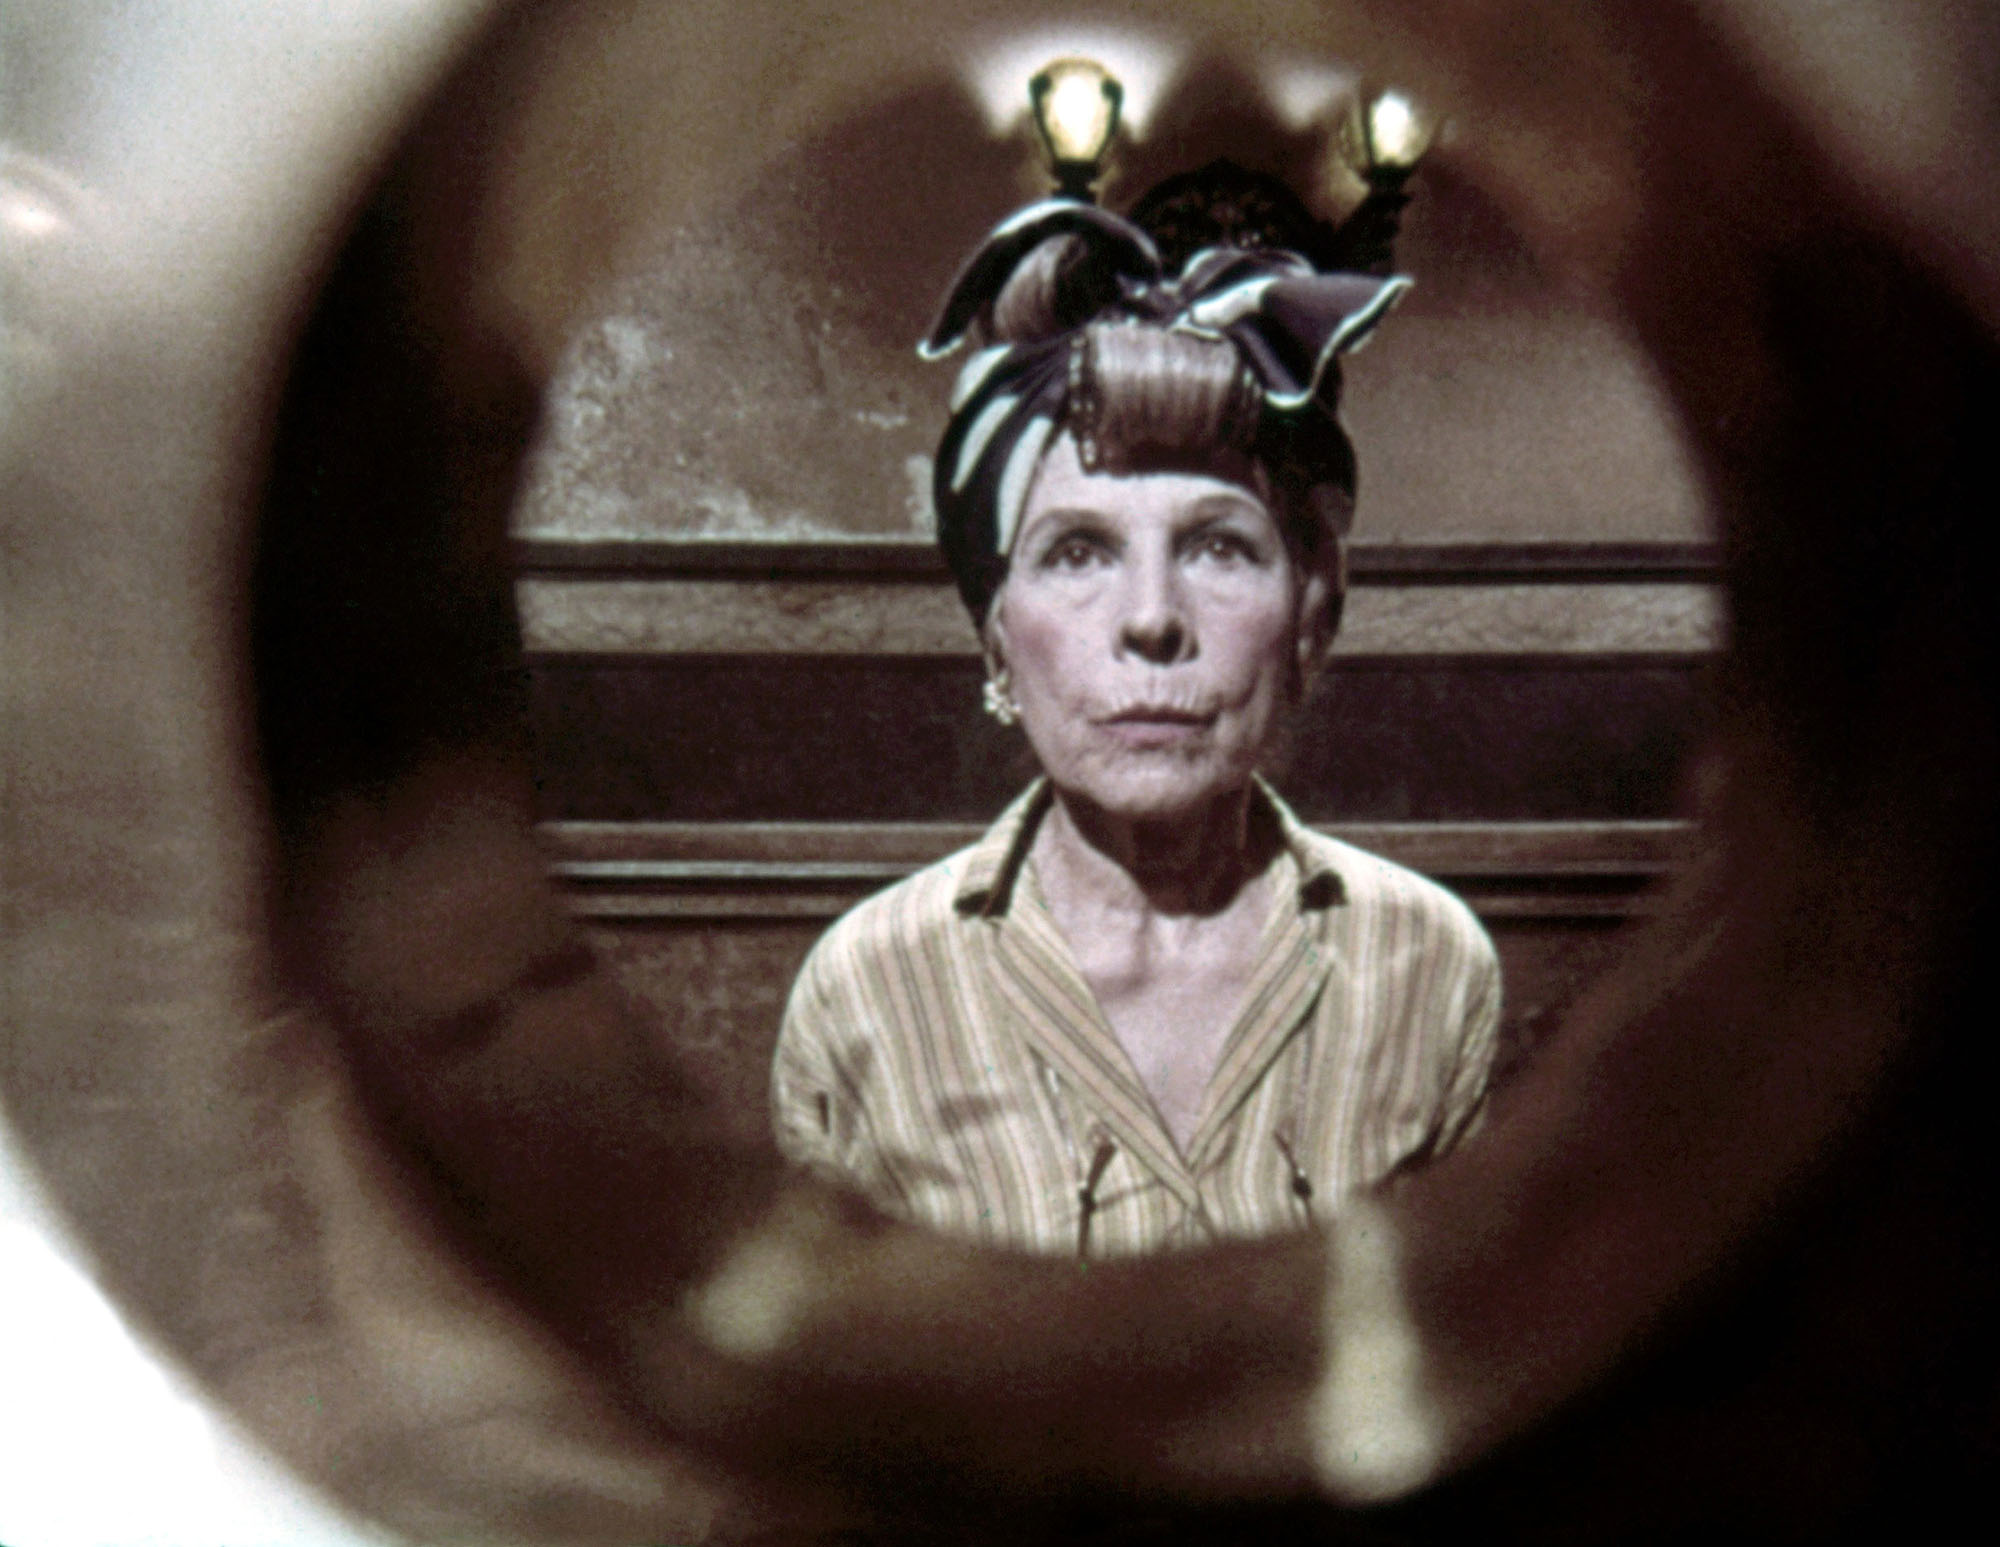 image from the 1968 movie "Rosemary's Baby." We are looking through the peephole of an apartment door at Ruth Gordon's character, Minnie Castevet, who is standing outside the door waiting for it to be opened. She is frowning and looks disturbed by something as she waits, and has her hair up in a wrap.